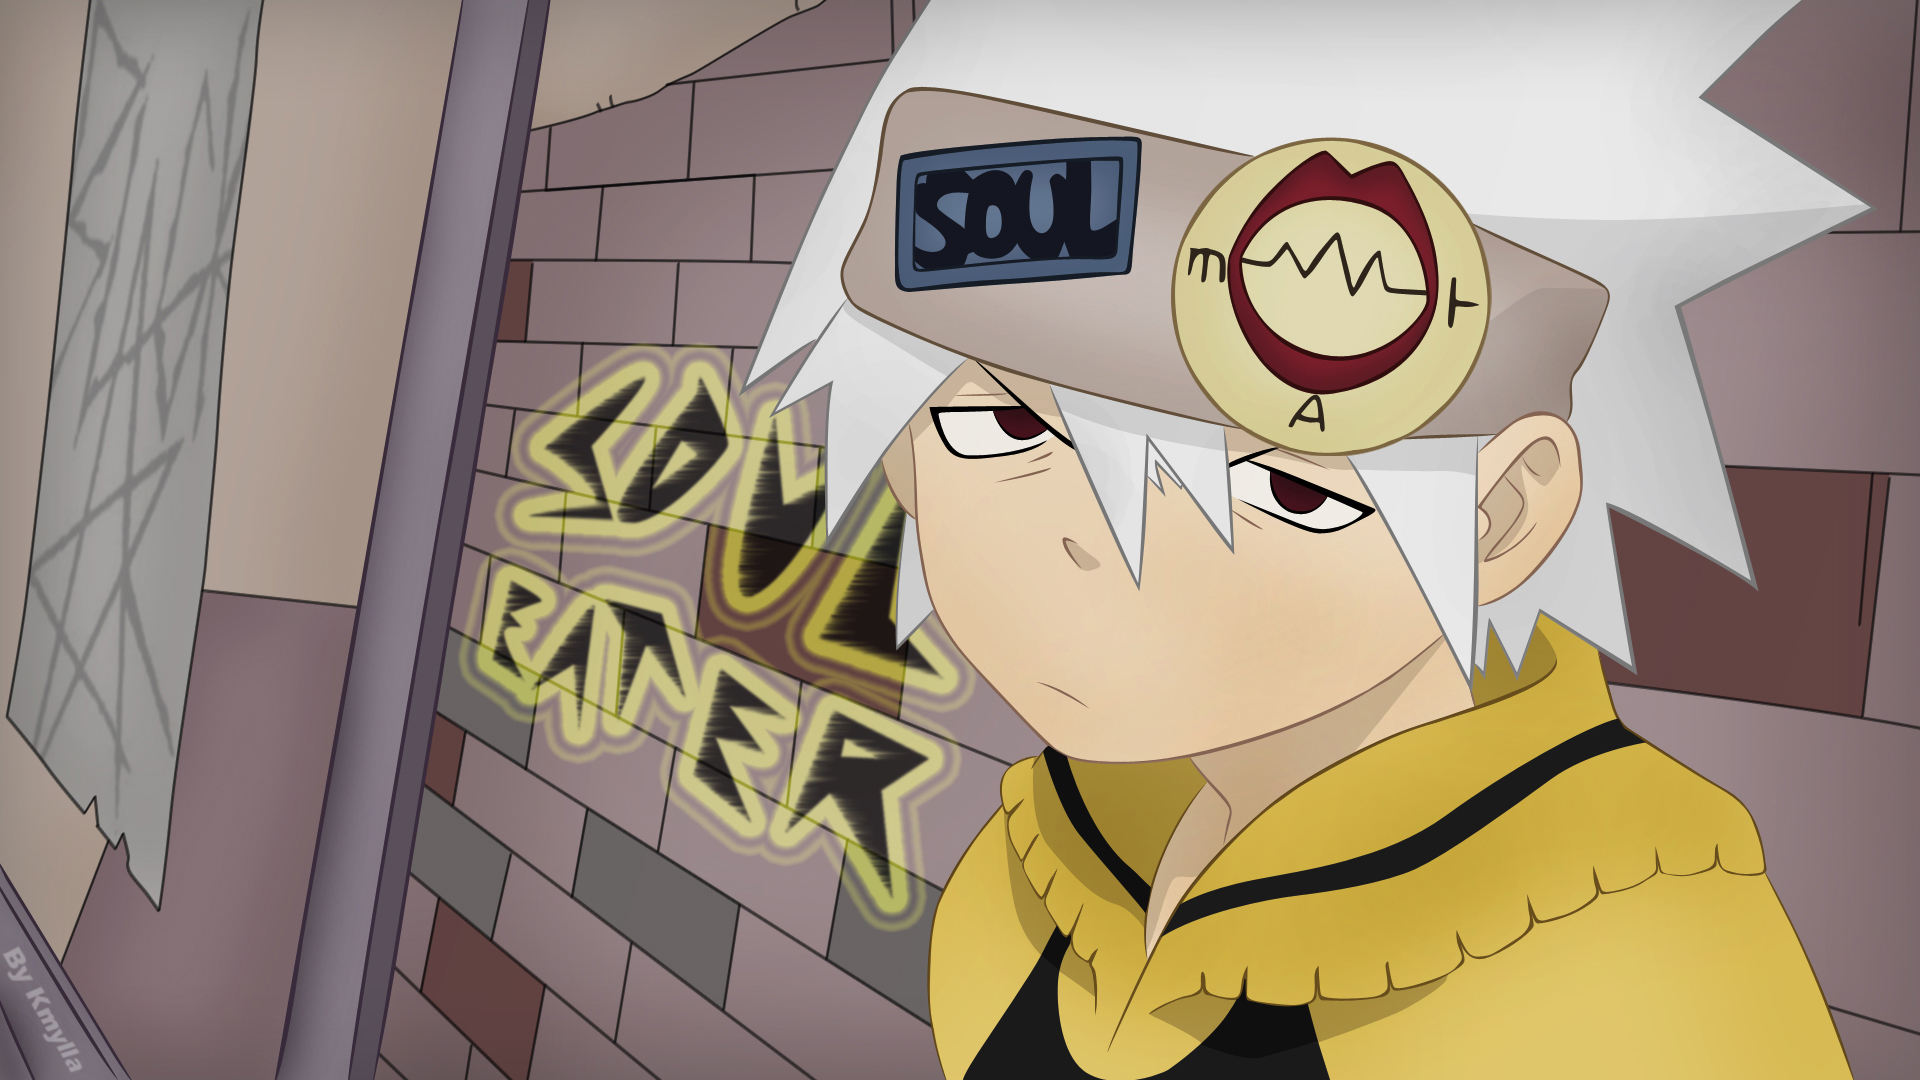 Soul Eater HD Wallpaper | Background Image | 1920x1080 | ID:722706 - Wallpaper Abyss